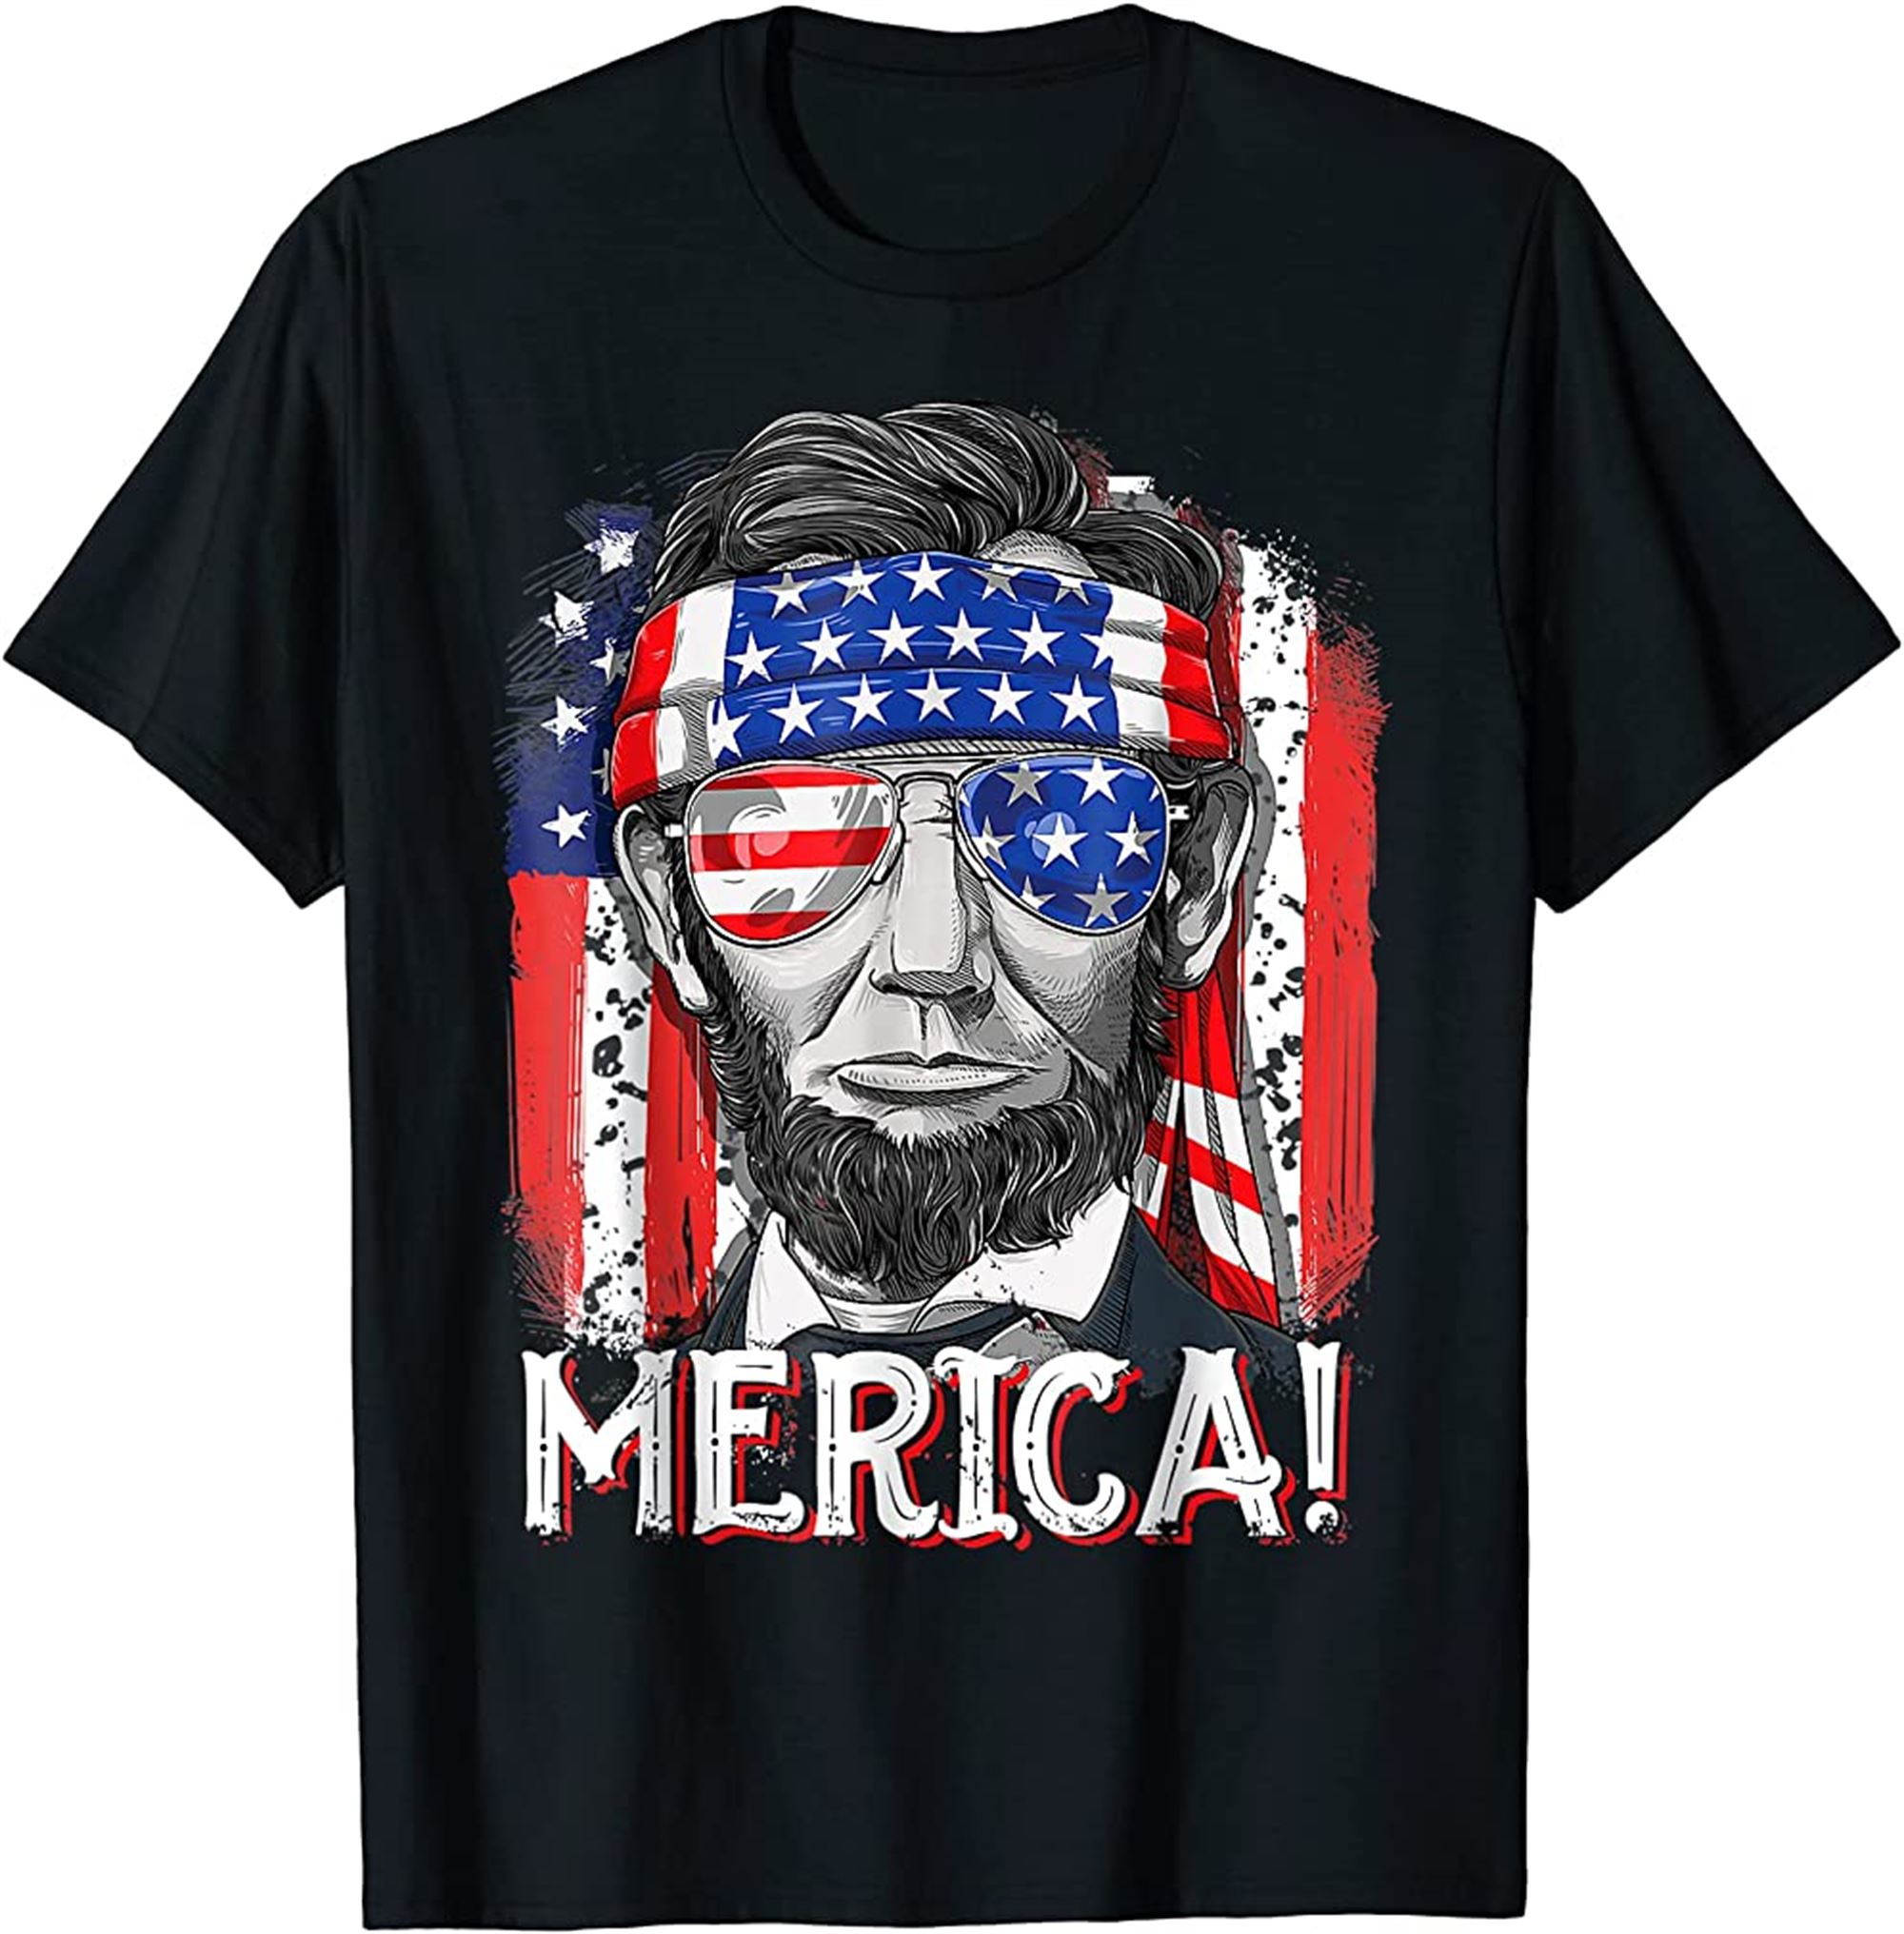 Merica Abe Lincoln 4th Of July Men American Flag Murica T-shirt Plus Size Up To 5xl